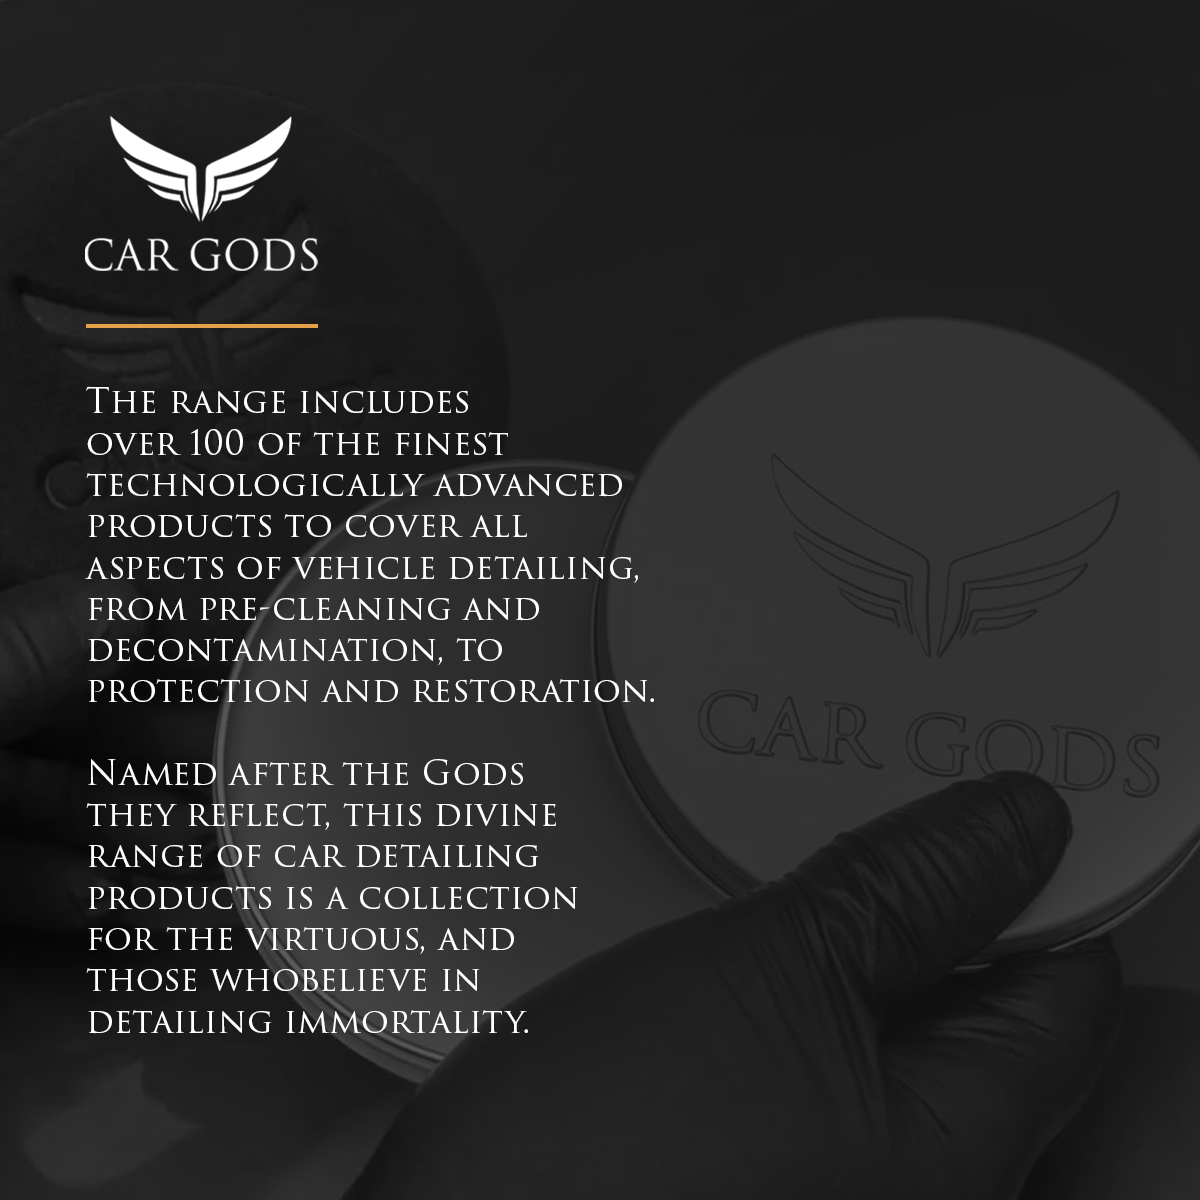 The Car Gods range includes over 100 of the finest technologically advanced products, covering all aspects of vehicle detailing. From pre-cleaning and vehicle decontamination to protection and paintwork restoration. This collection of luxury car detailing products are named after the Gods they reflect.